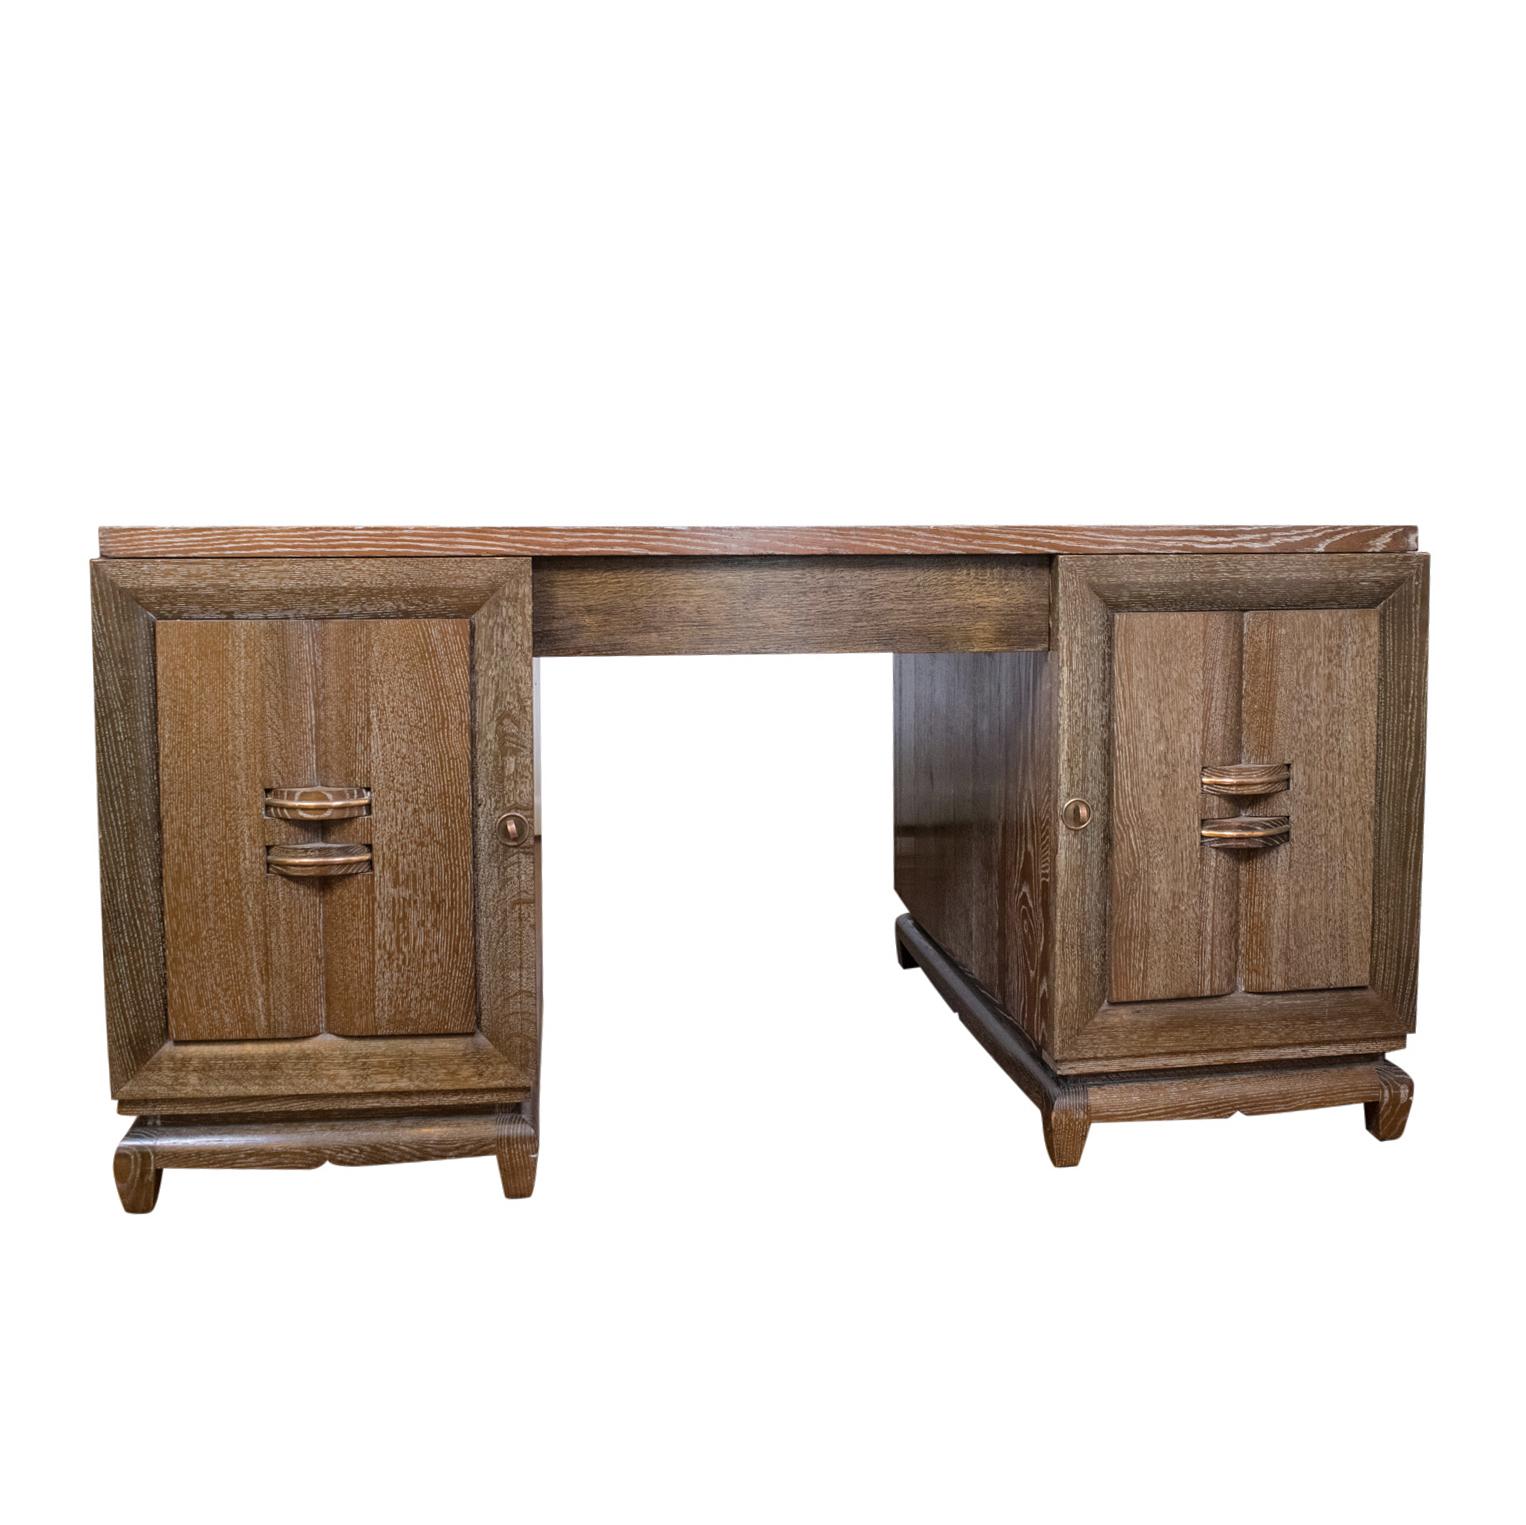 Cerused Oak Art Deco Desk Attributed to Charles Dudouyt '1885-1946' For Sale